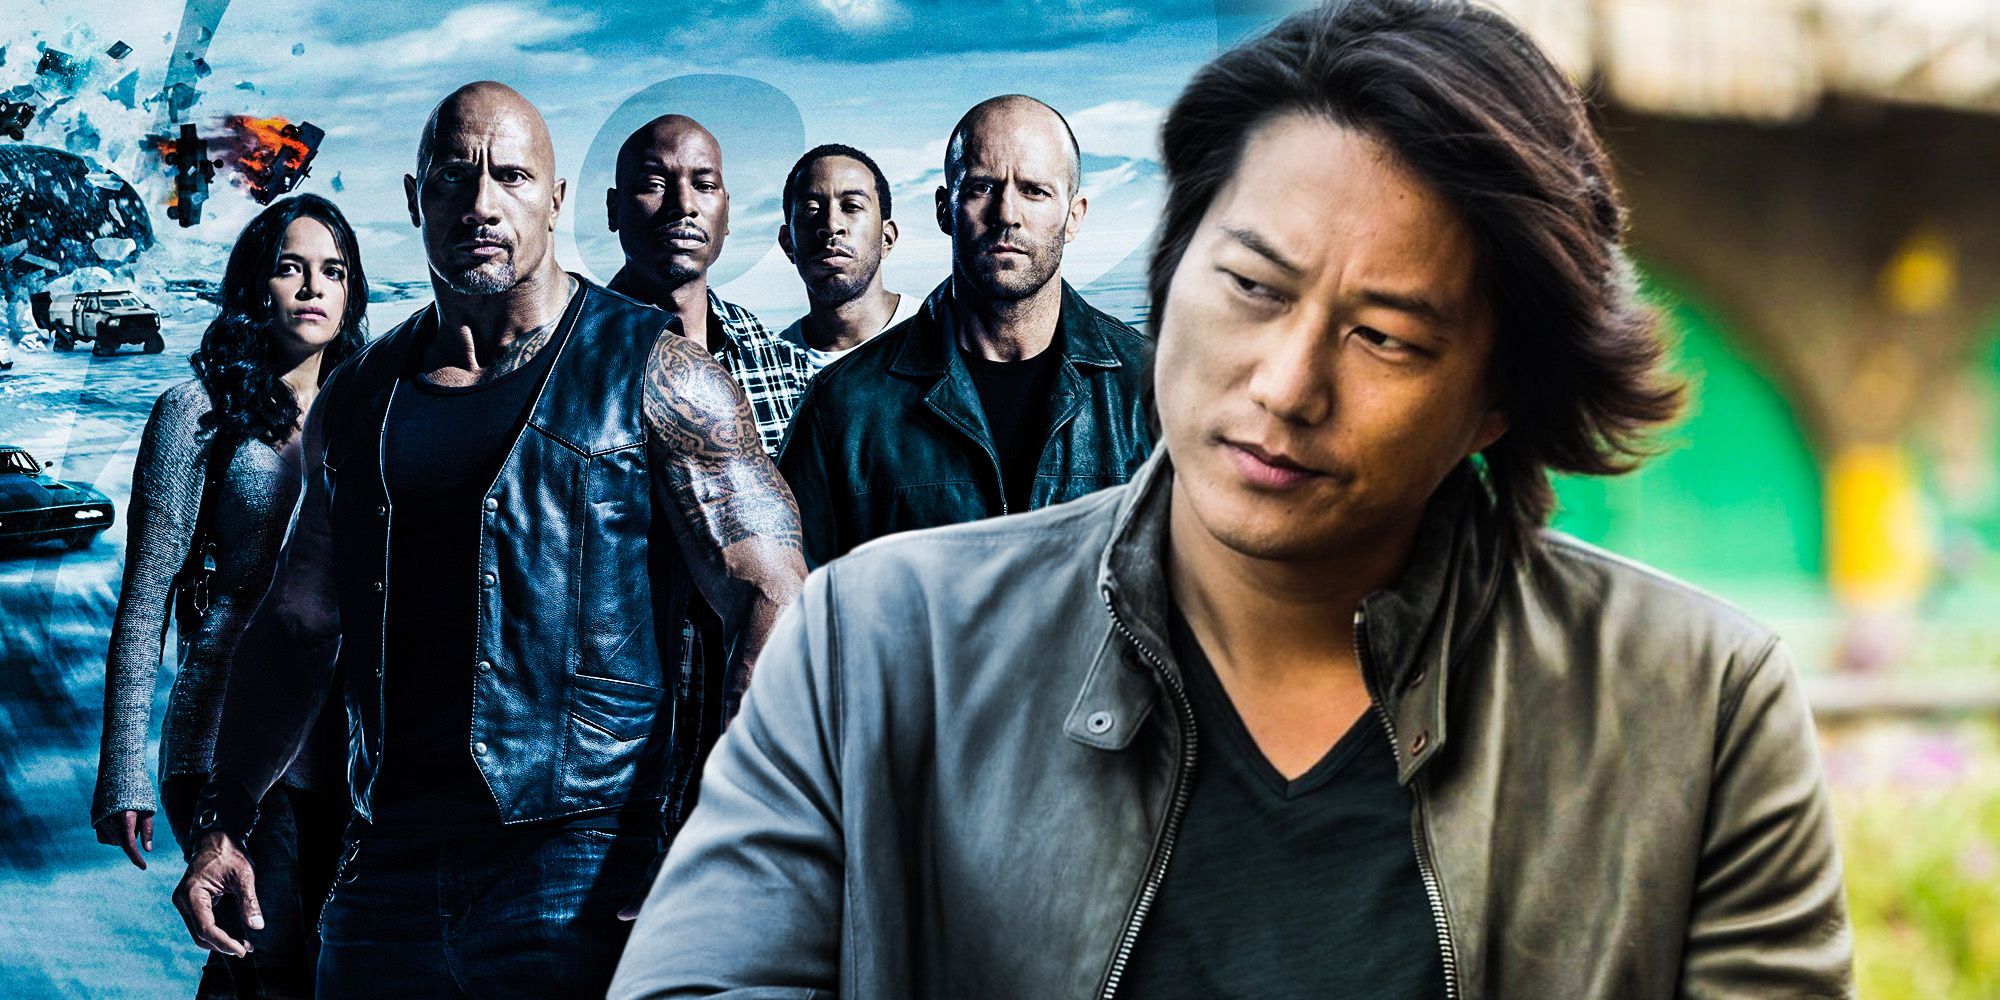 Han Return fast and furious 9 fate of the furious